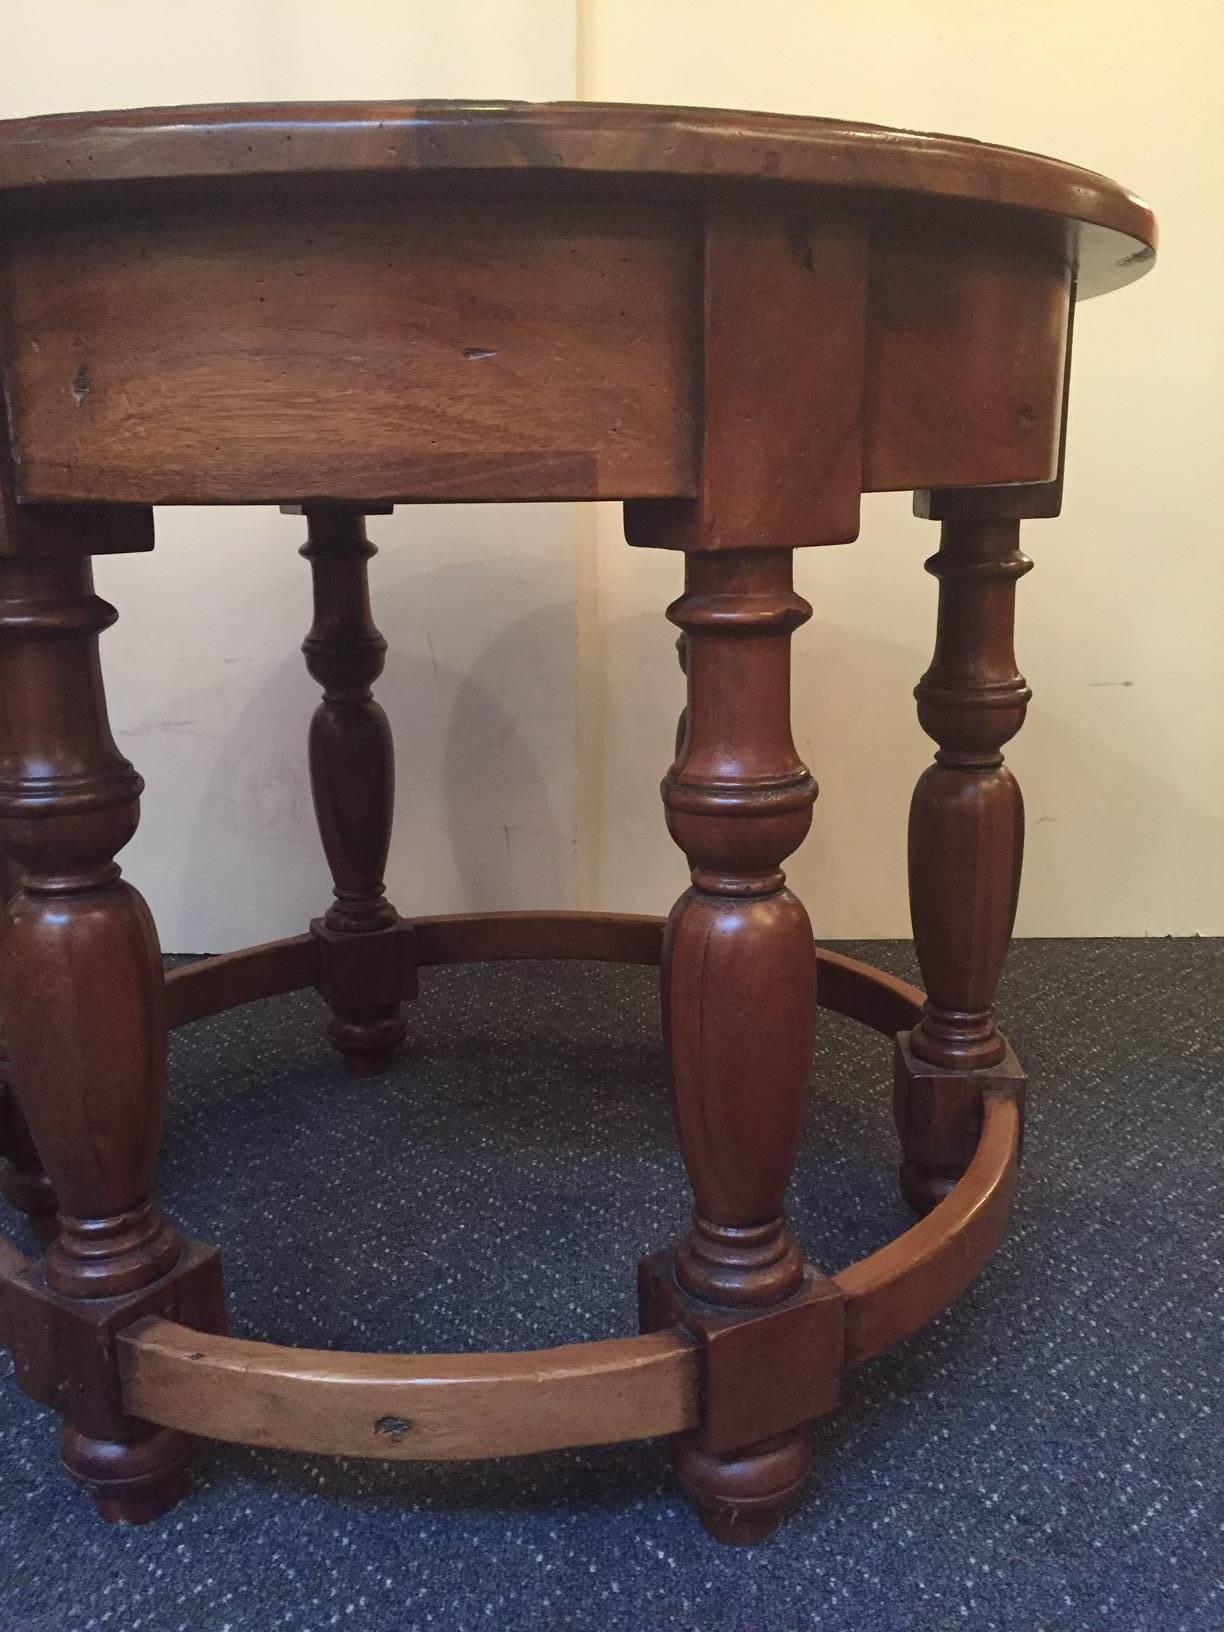 Handsome round center hall table with a Jacobean style, about 30 years old, having six elaborately turned legs and a beautiful wooden circular base that runs through the bottom of the legs.

RR
                